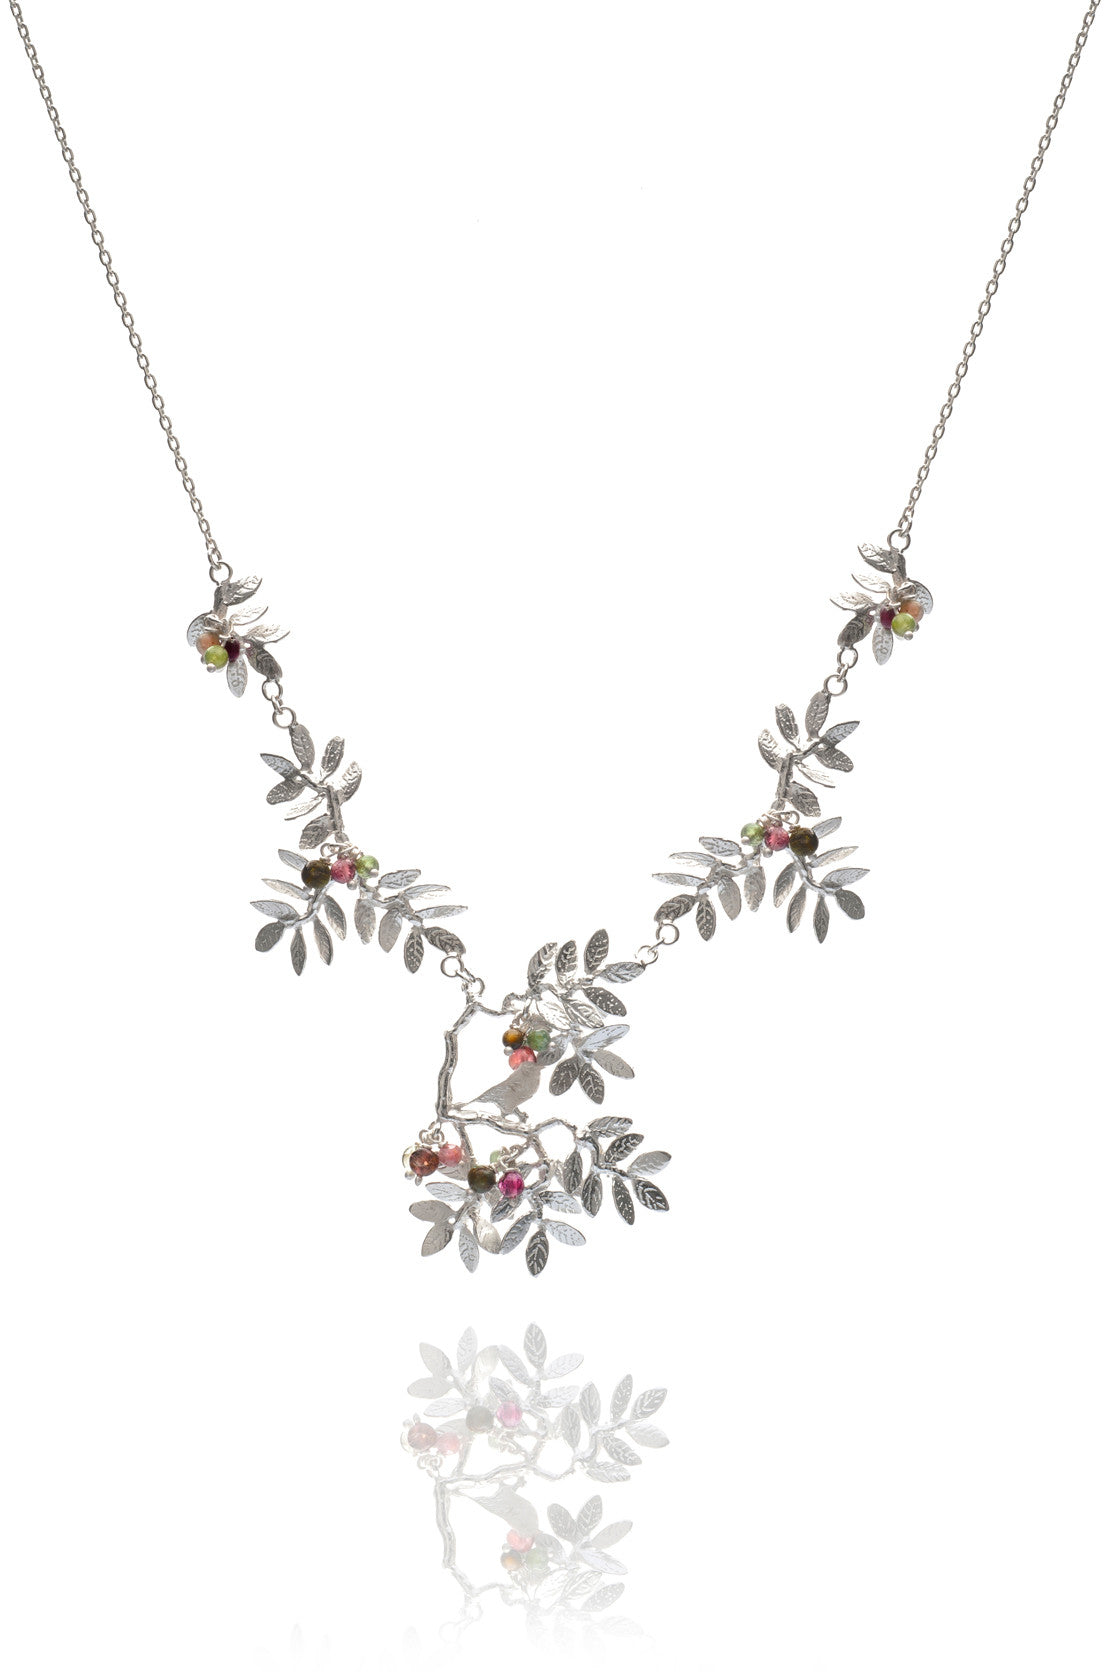 Sterling Silver Tiny Bird Statement Necklace with semi precious tourmaline berries 